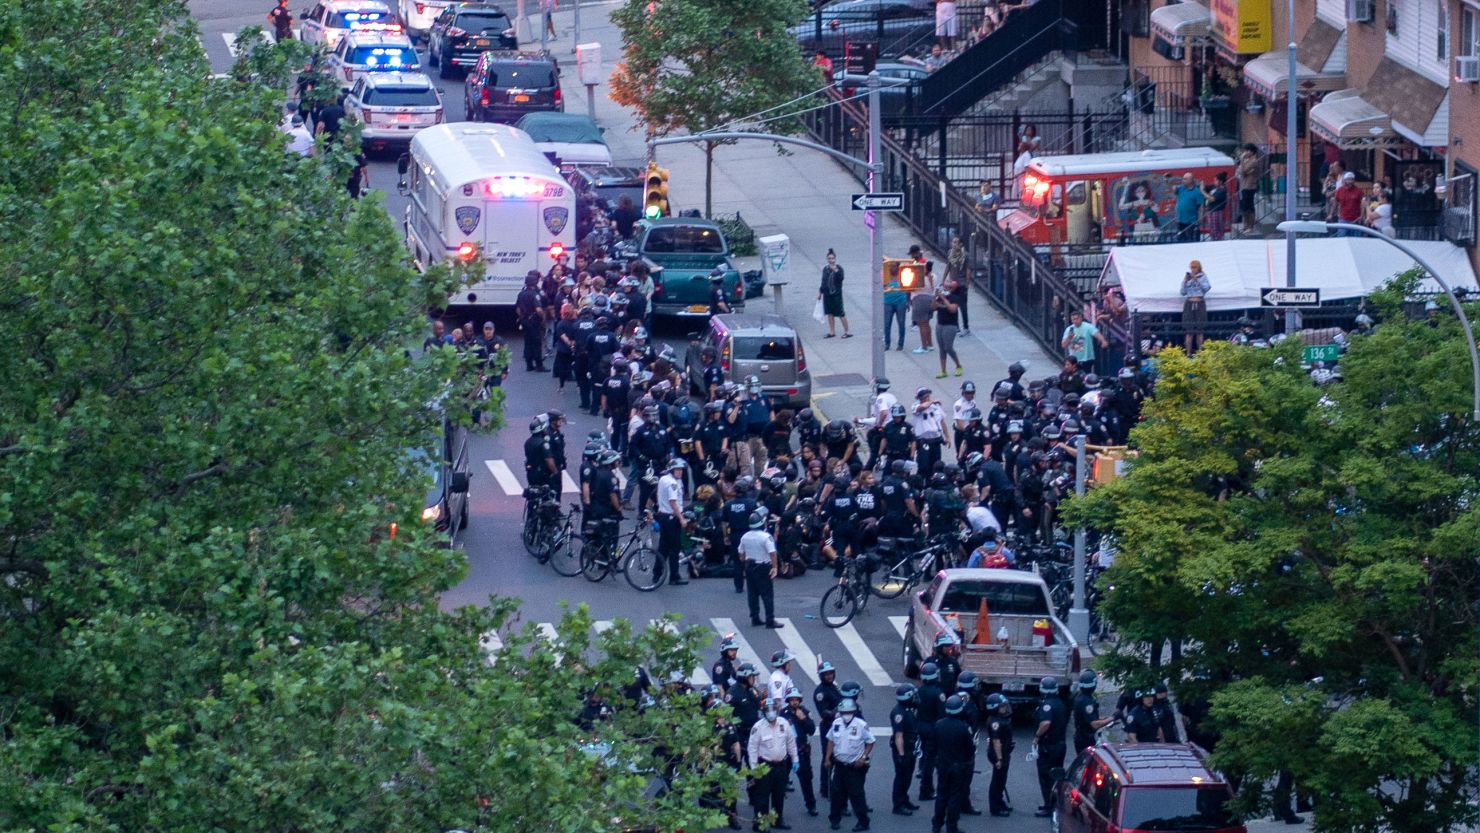 Police arrest protesters for breaking a citywide curfew in June 2020 in The Bronx, New York. 